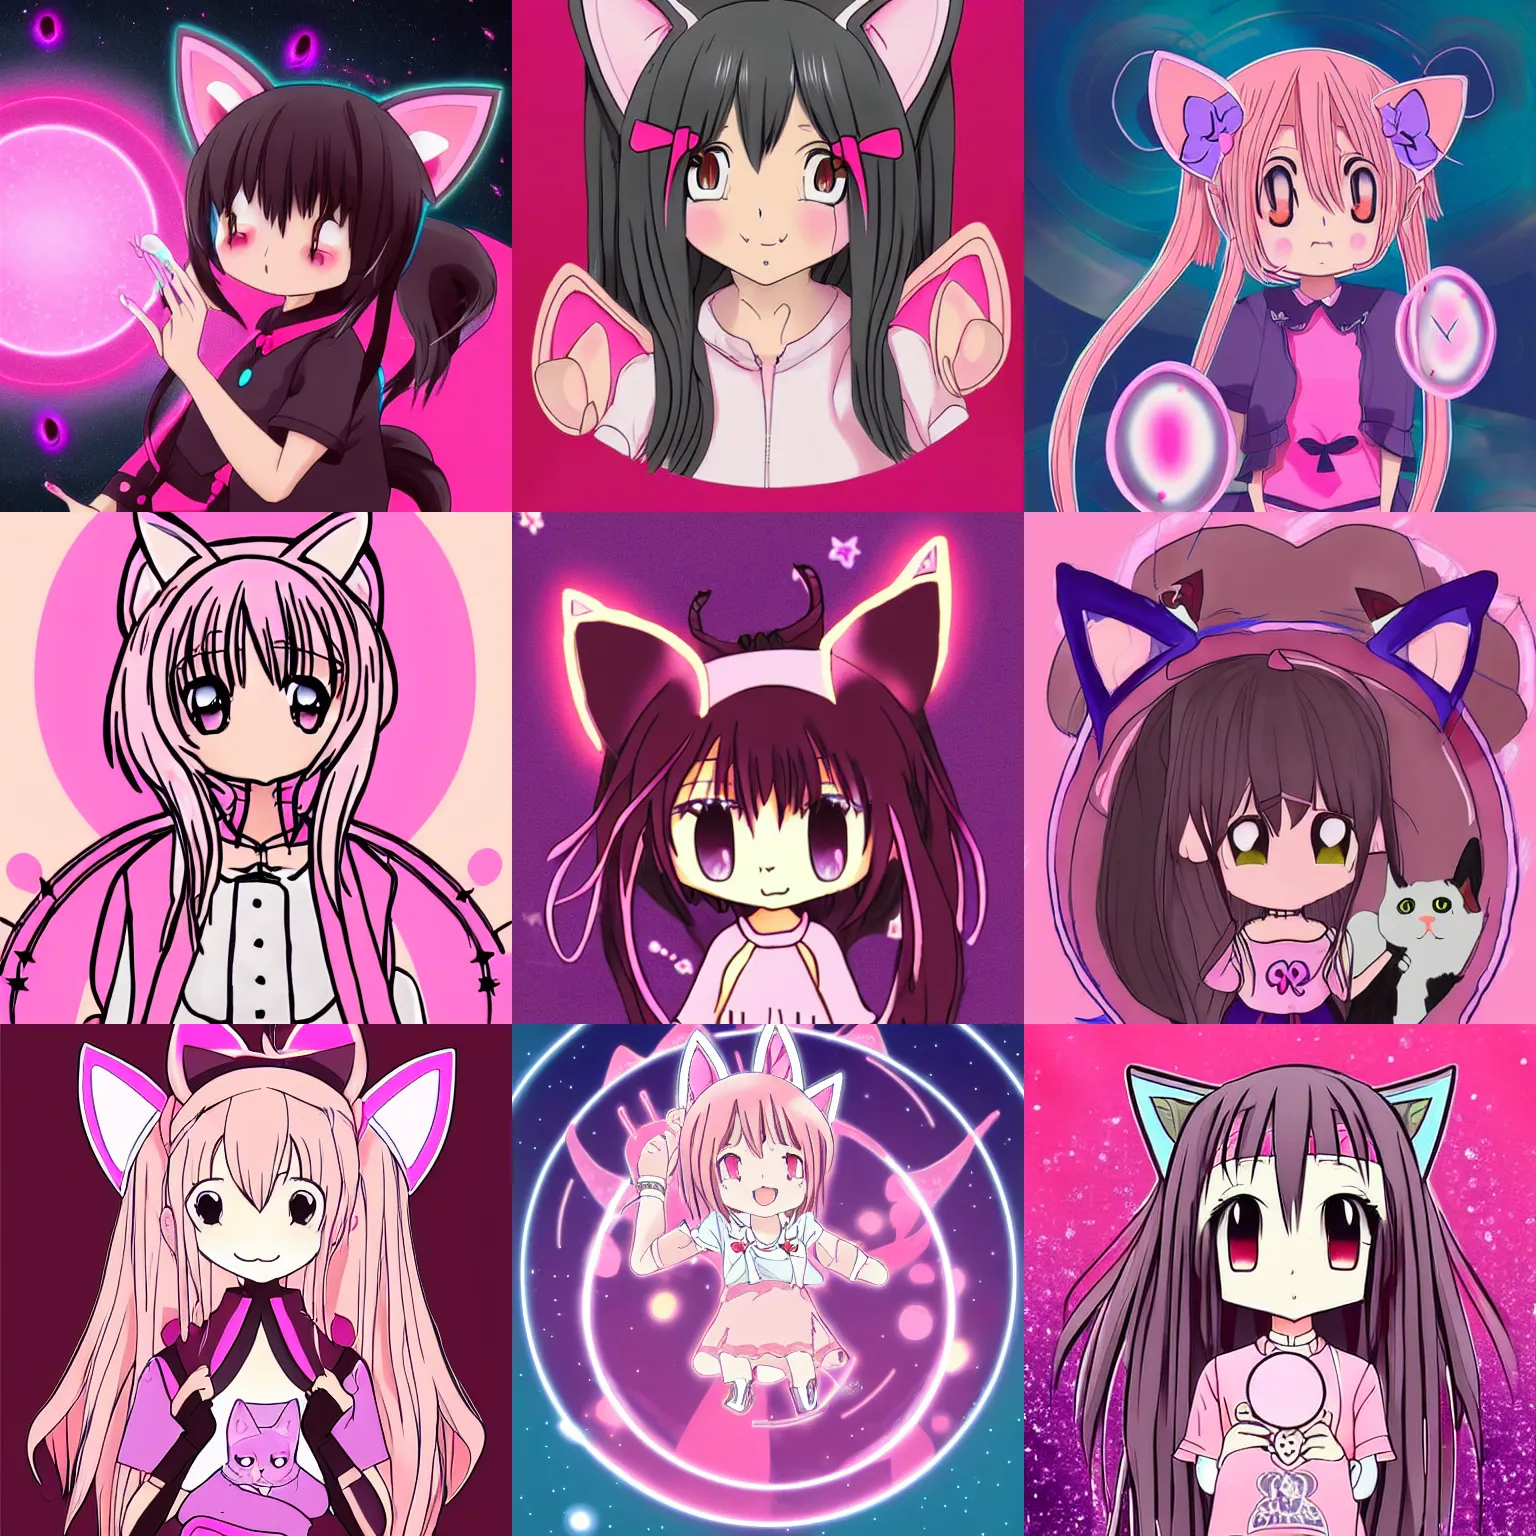 Prompt: card art of anime (cat) girl girl with cat ears drawing magic circles. Pink hue.